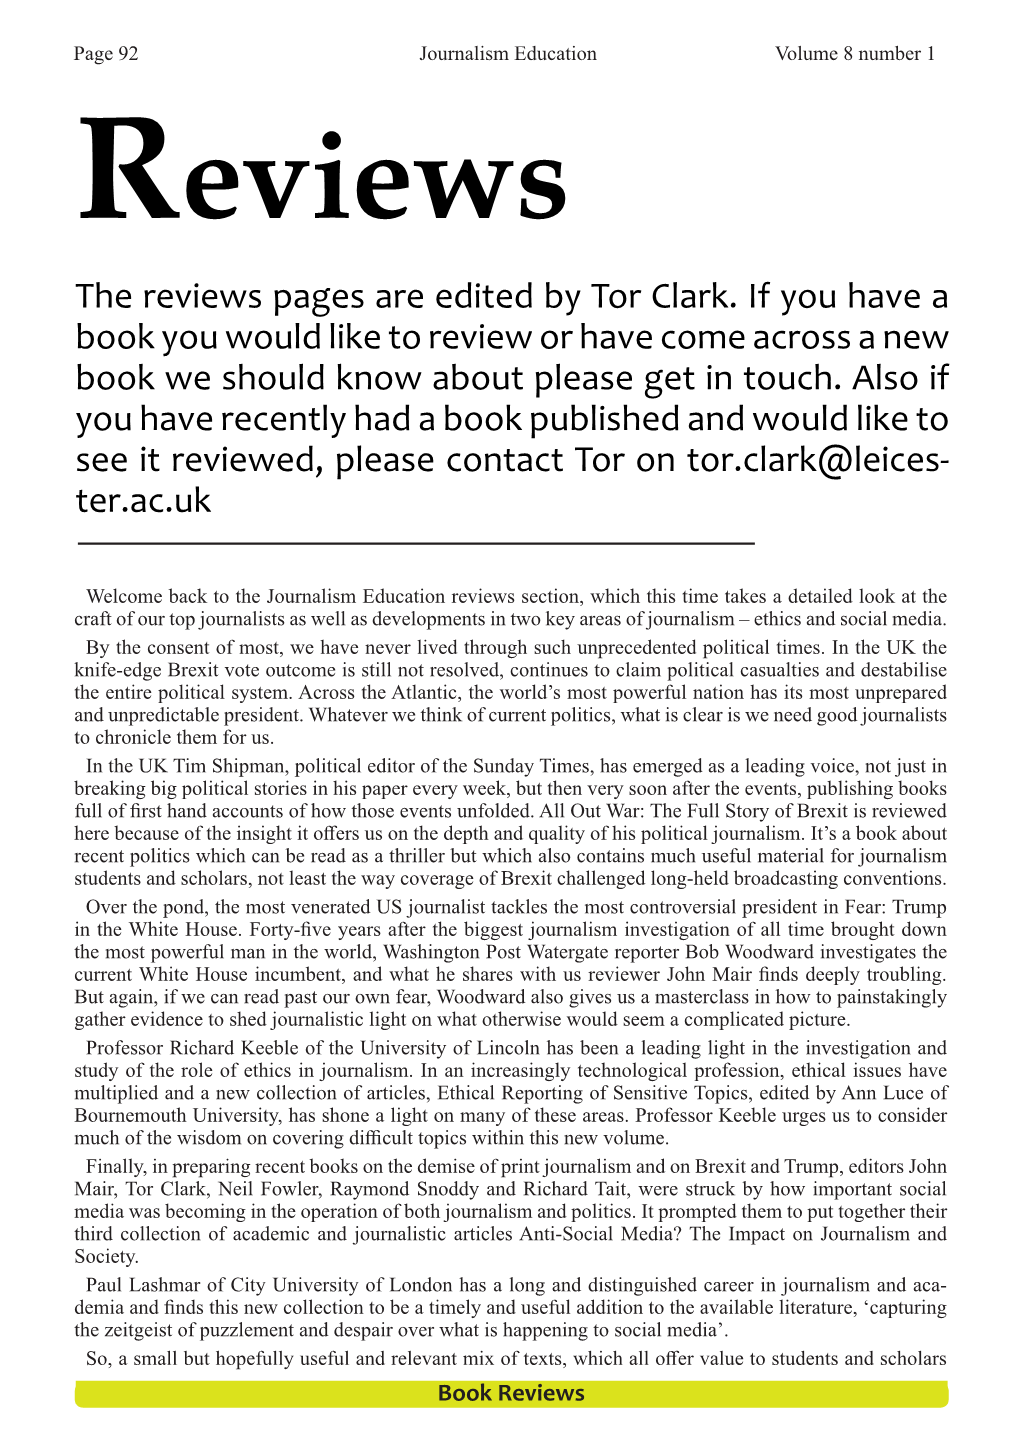 Reviews the Reviews Pages Are Edited by Tor Clark